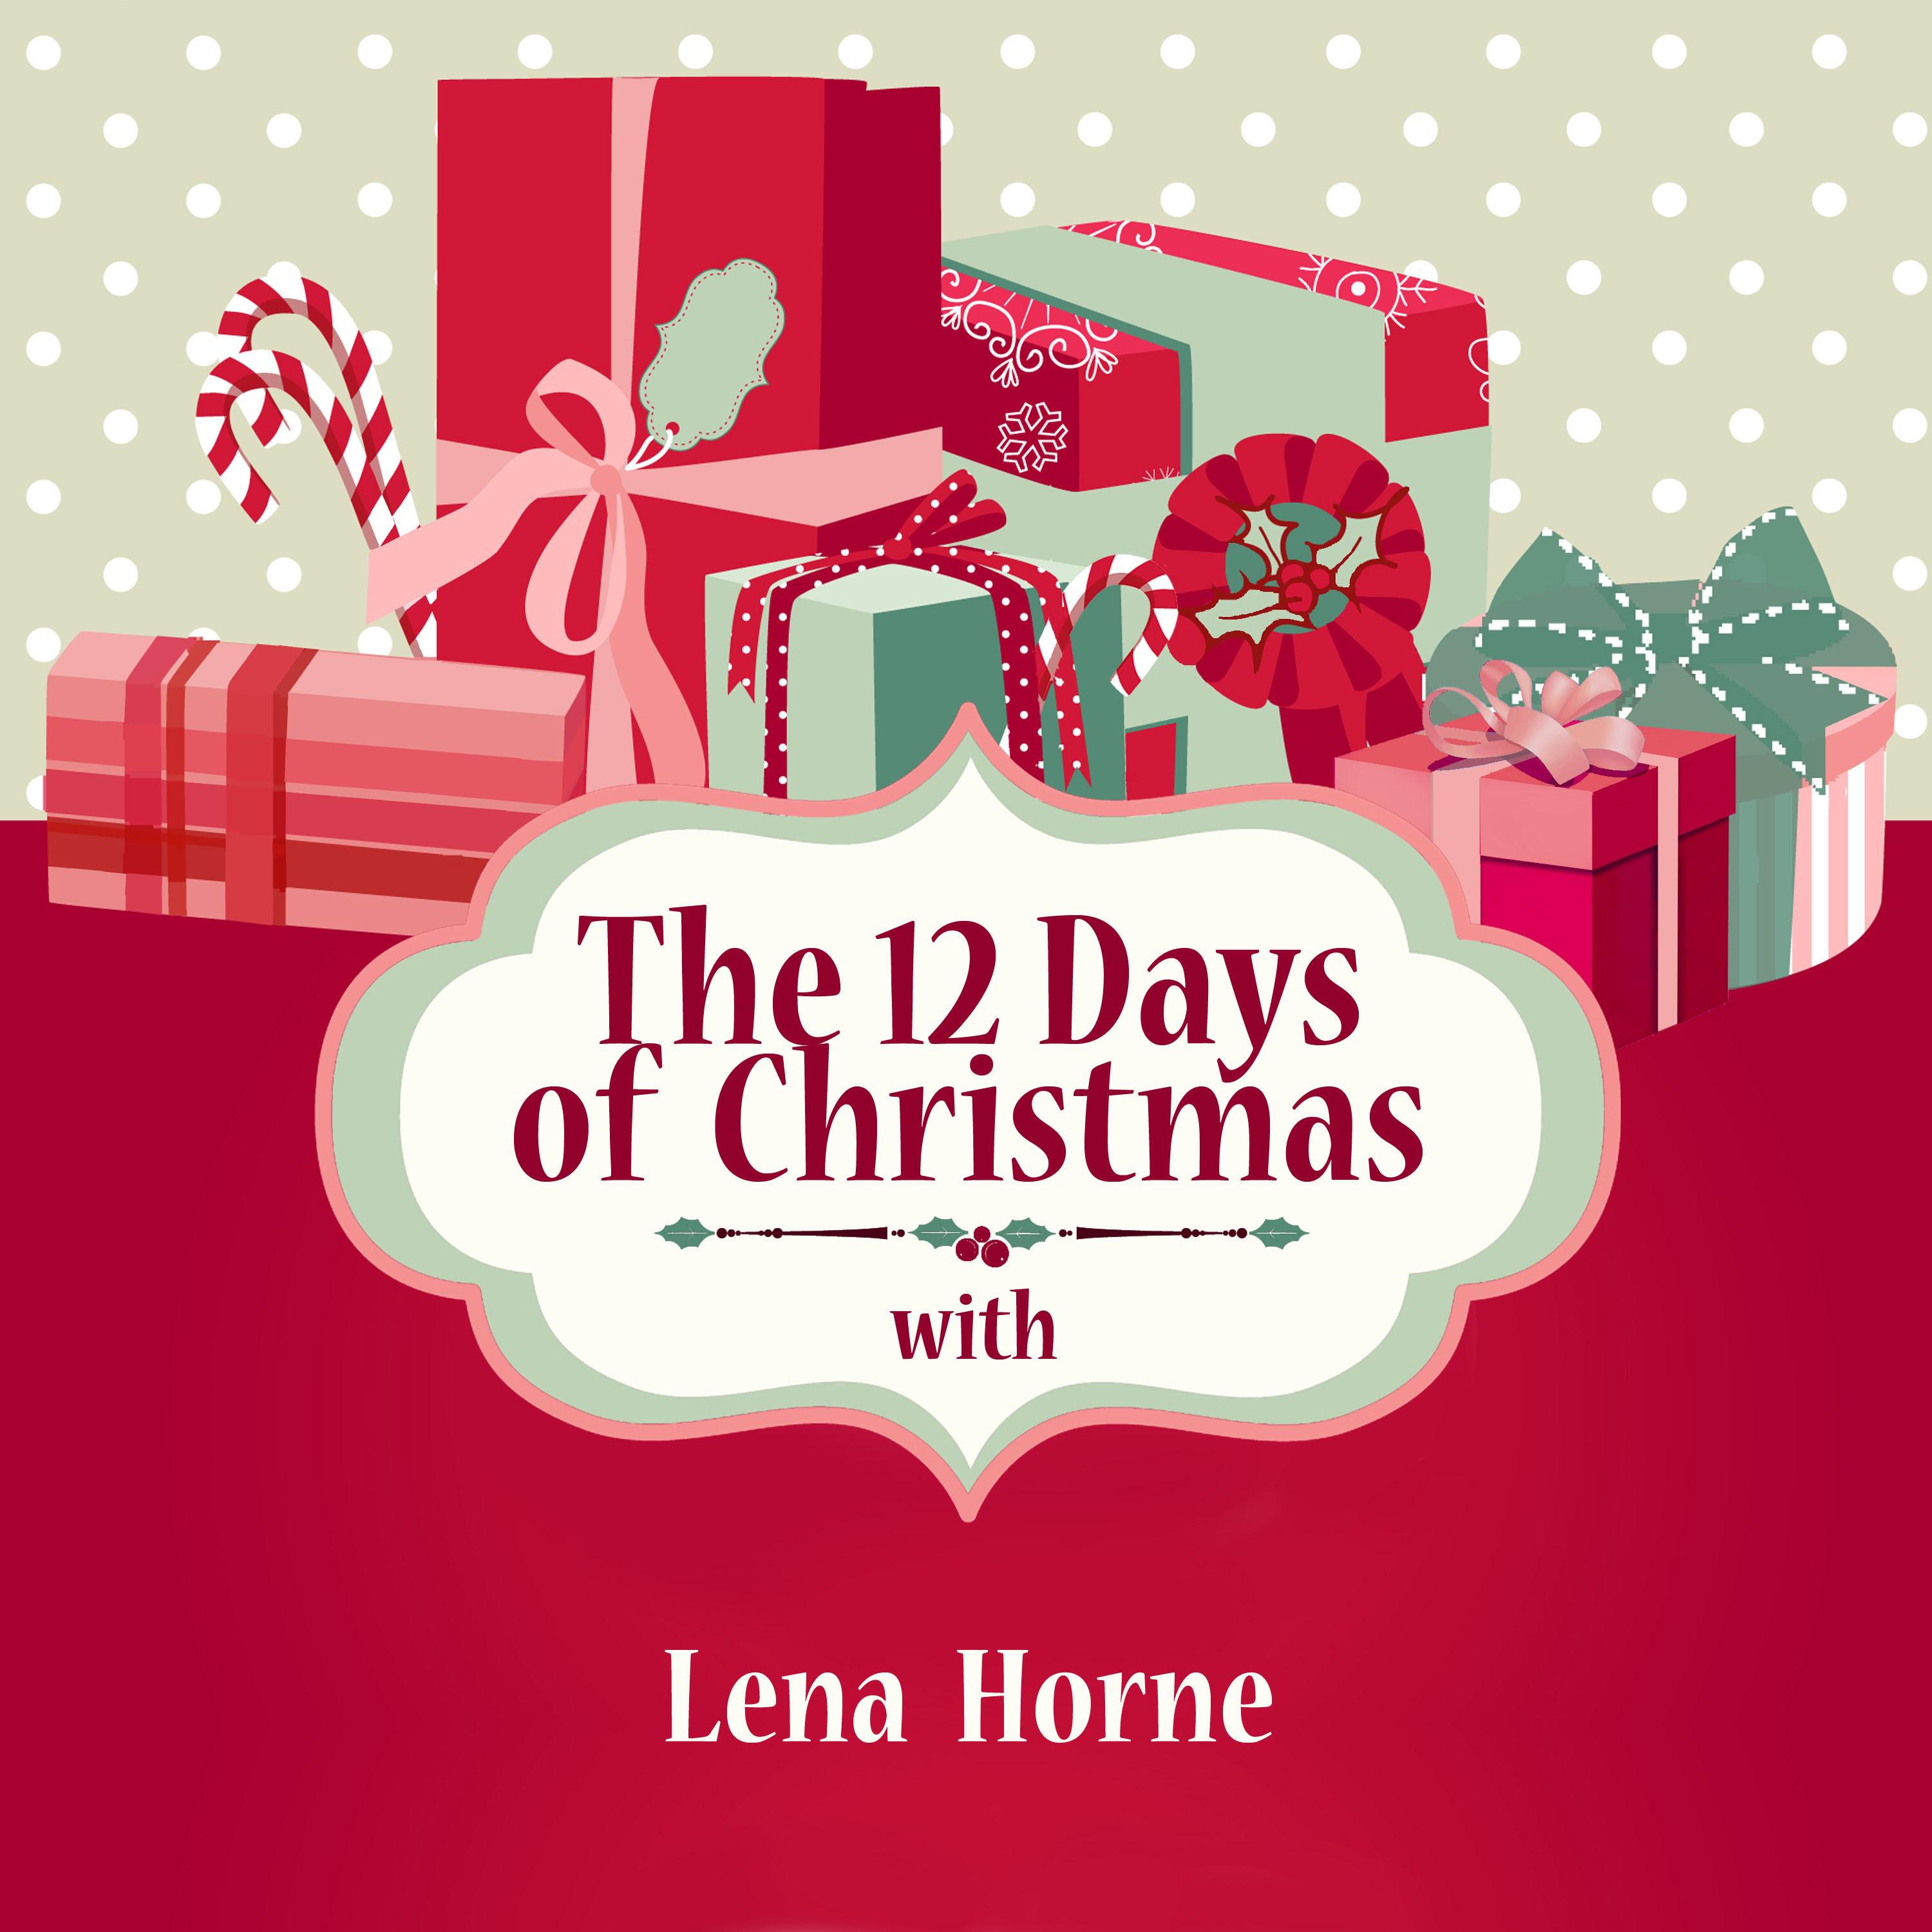 The 12 Days of Christmas with Lena Horne